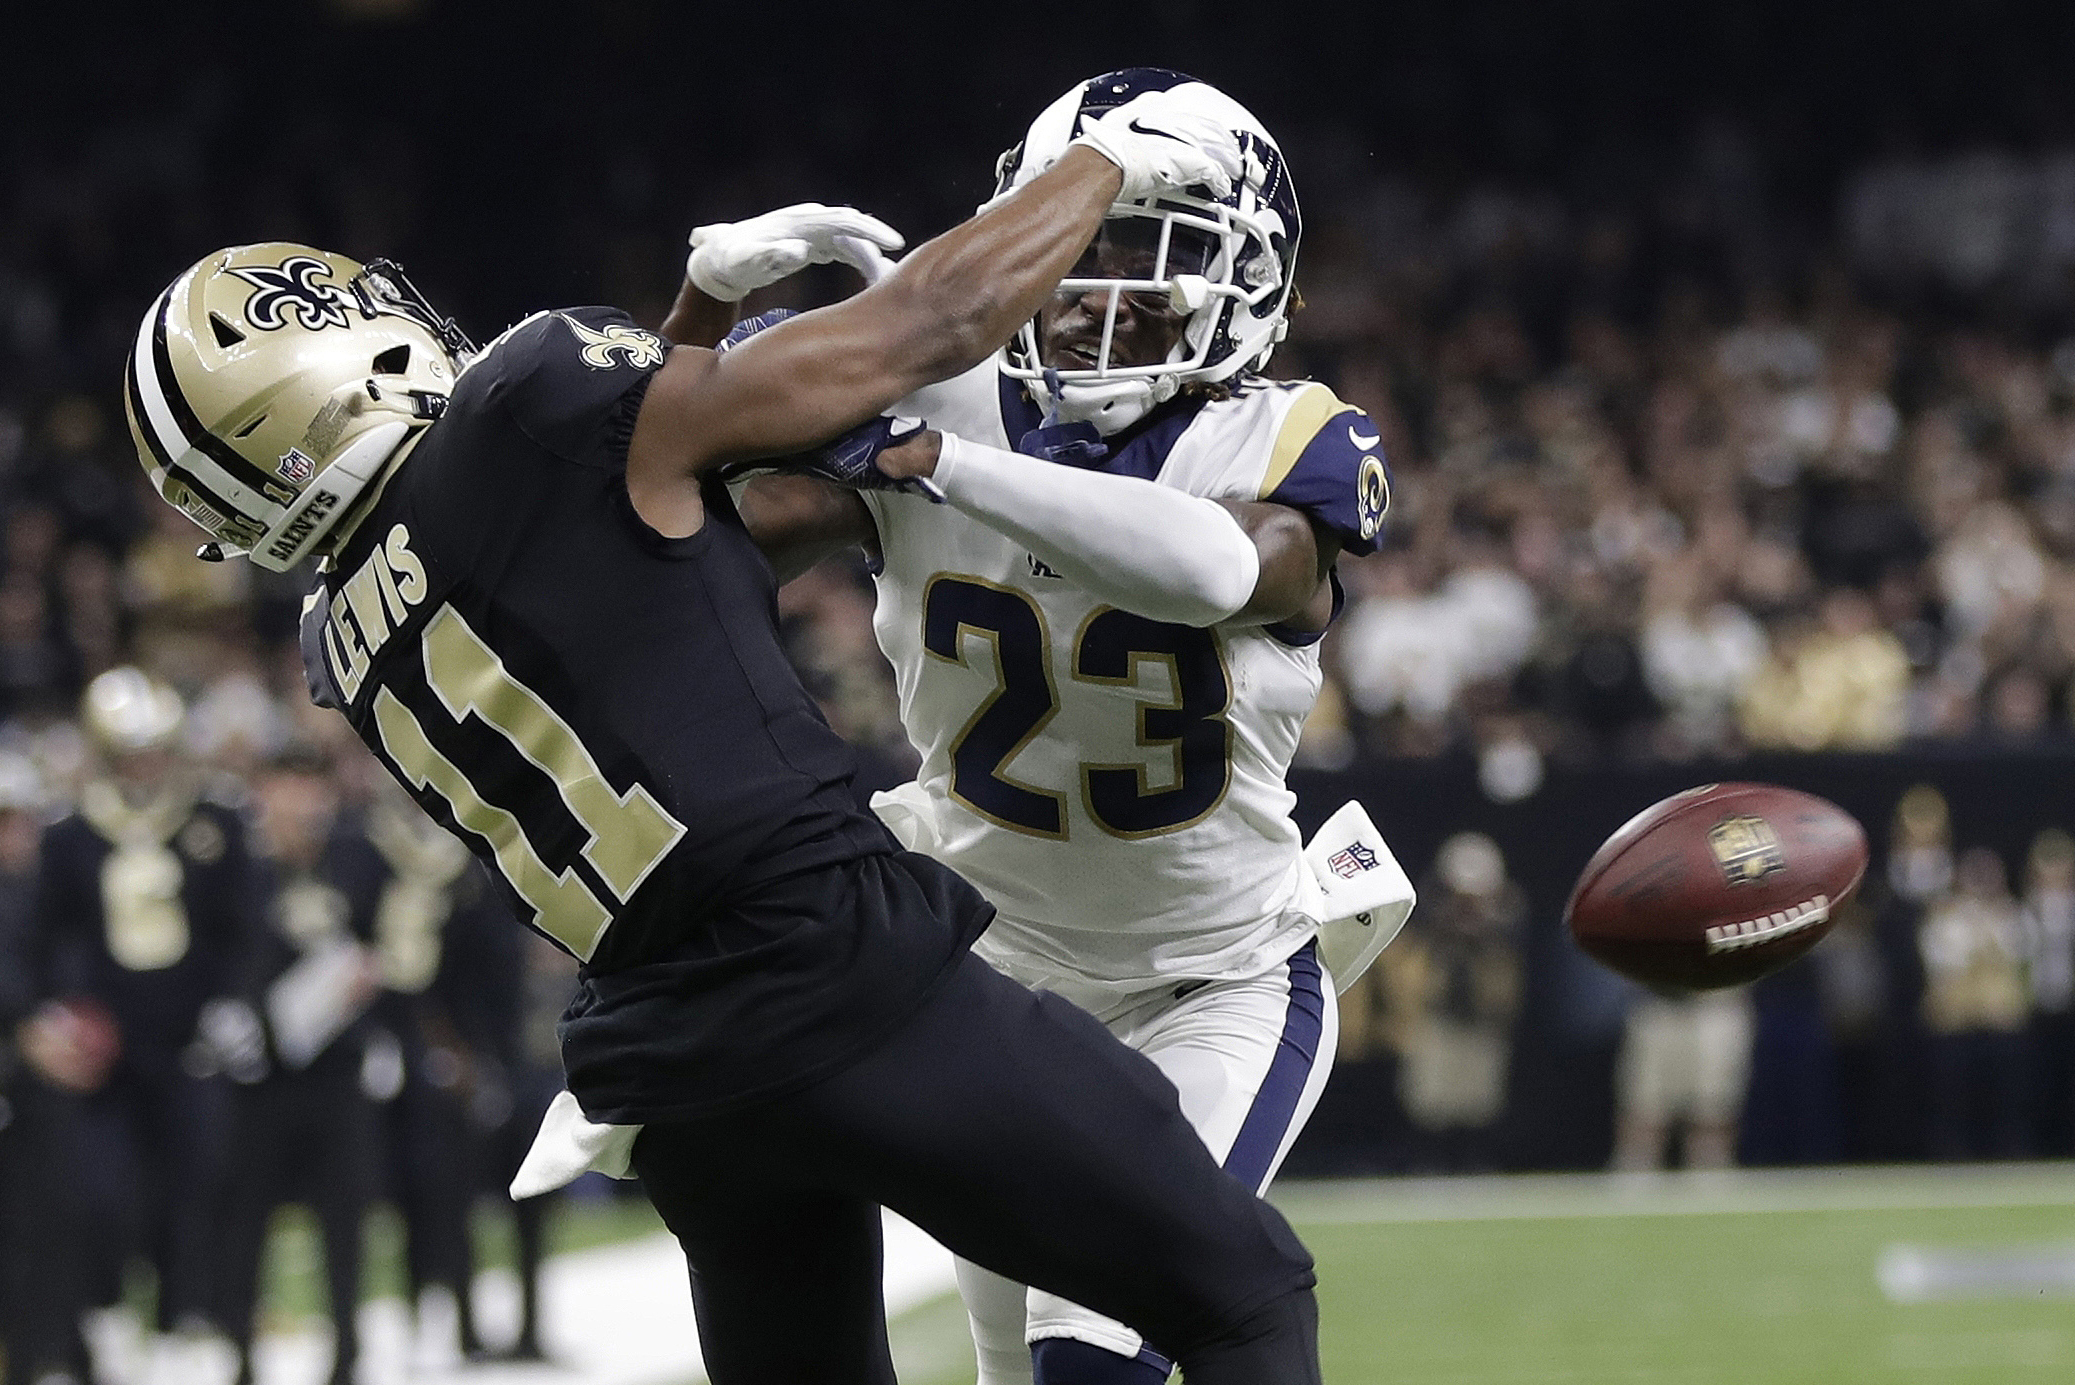 Rams vs. Saints results: Score, highlights from controversial NFC